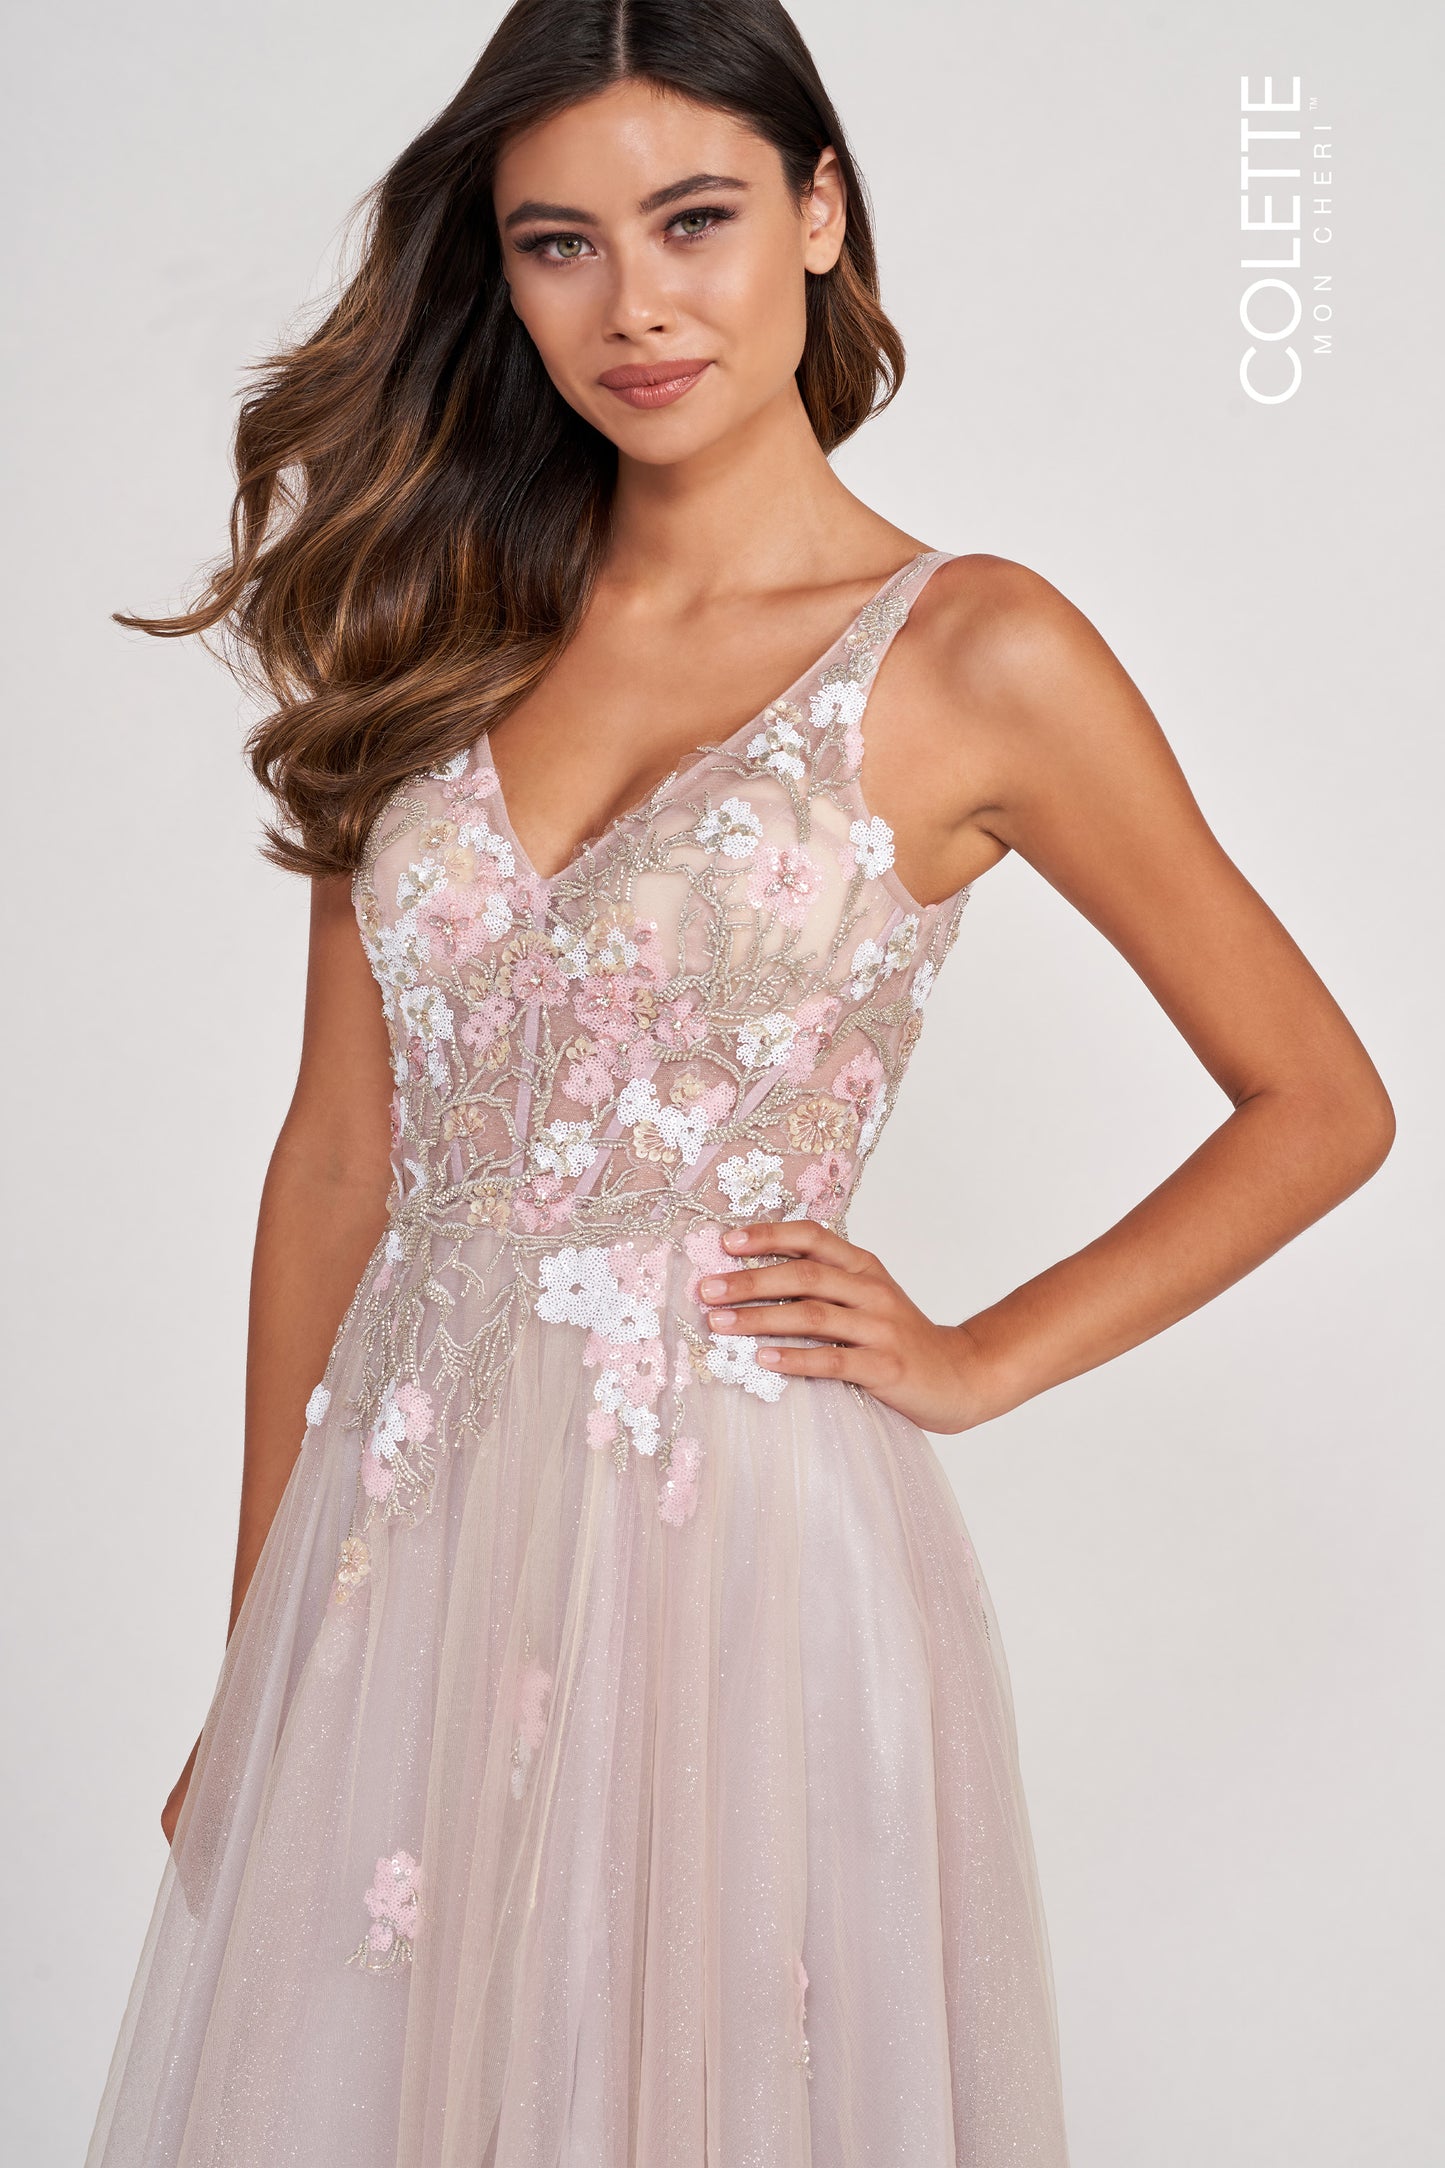 Brunette Model standing in silver multi colored prom dress with one hand on hip. Dress features Tulle Fabric, Sheer Corset Bodice, Flowy Skirt, Slit, Lace-Up Back